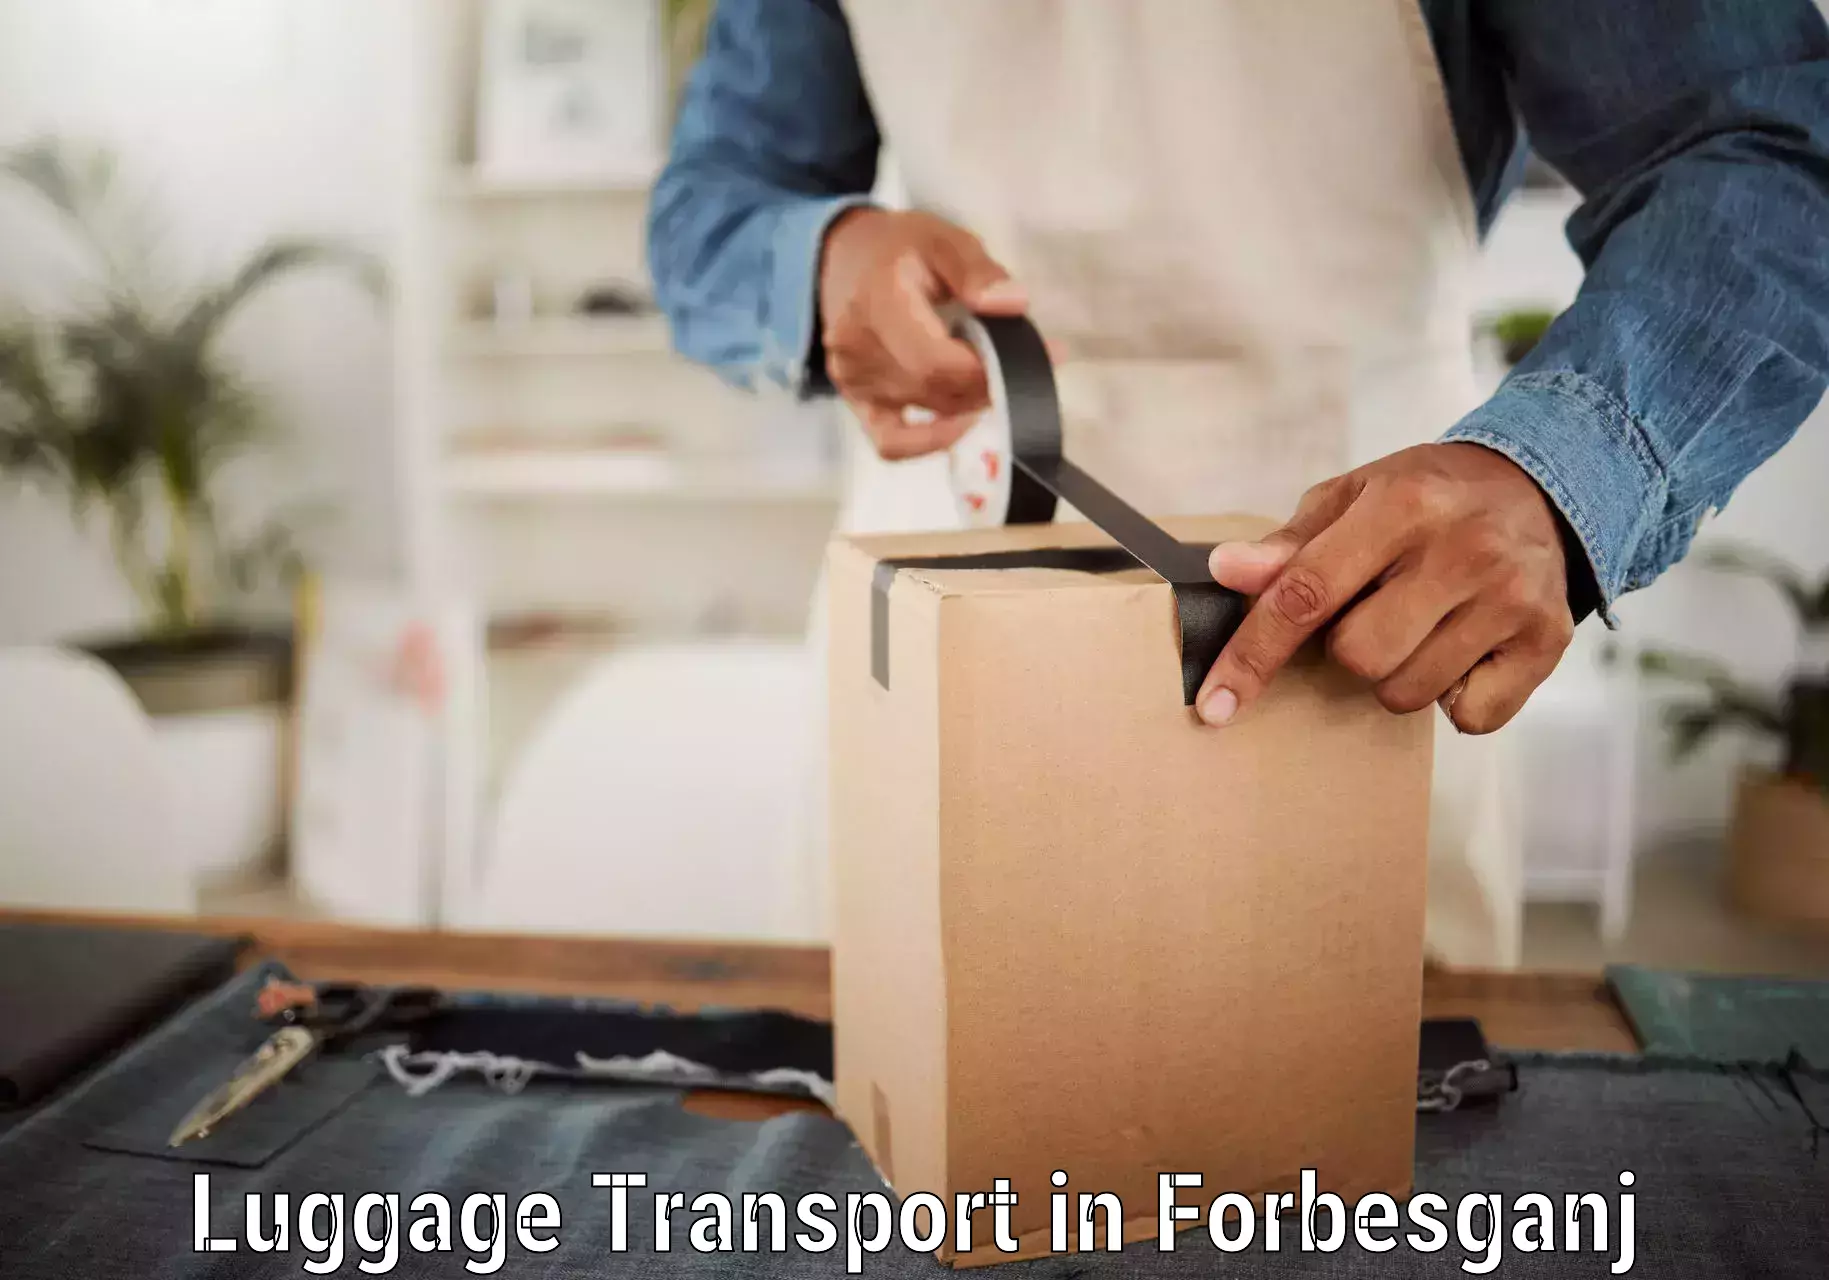 Automated luggage transport in Forbesganj